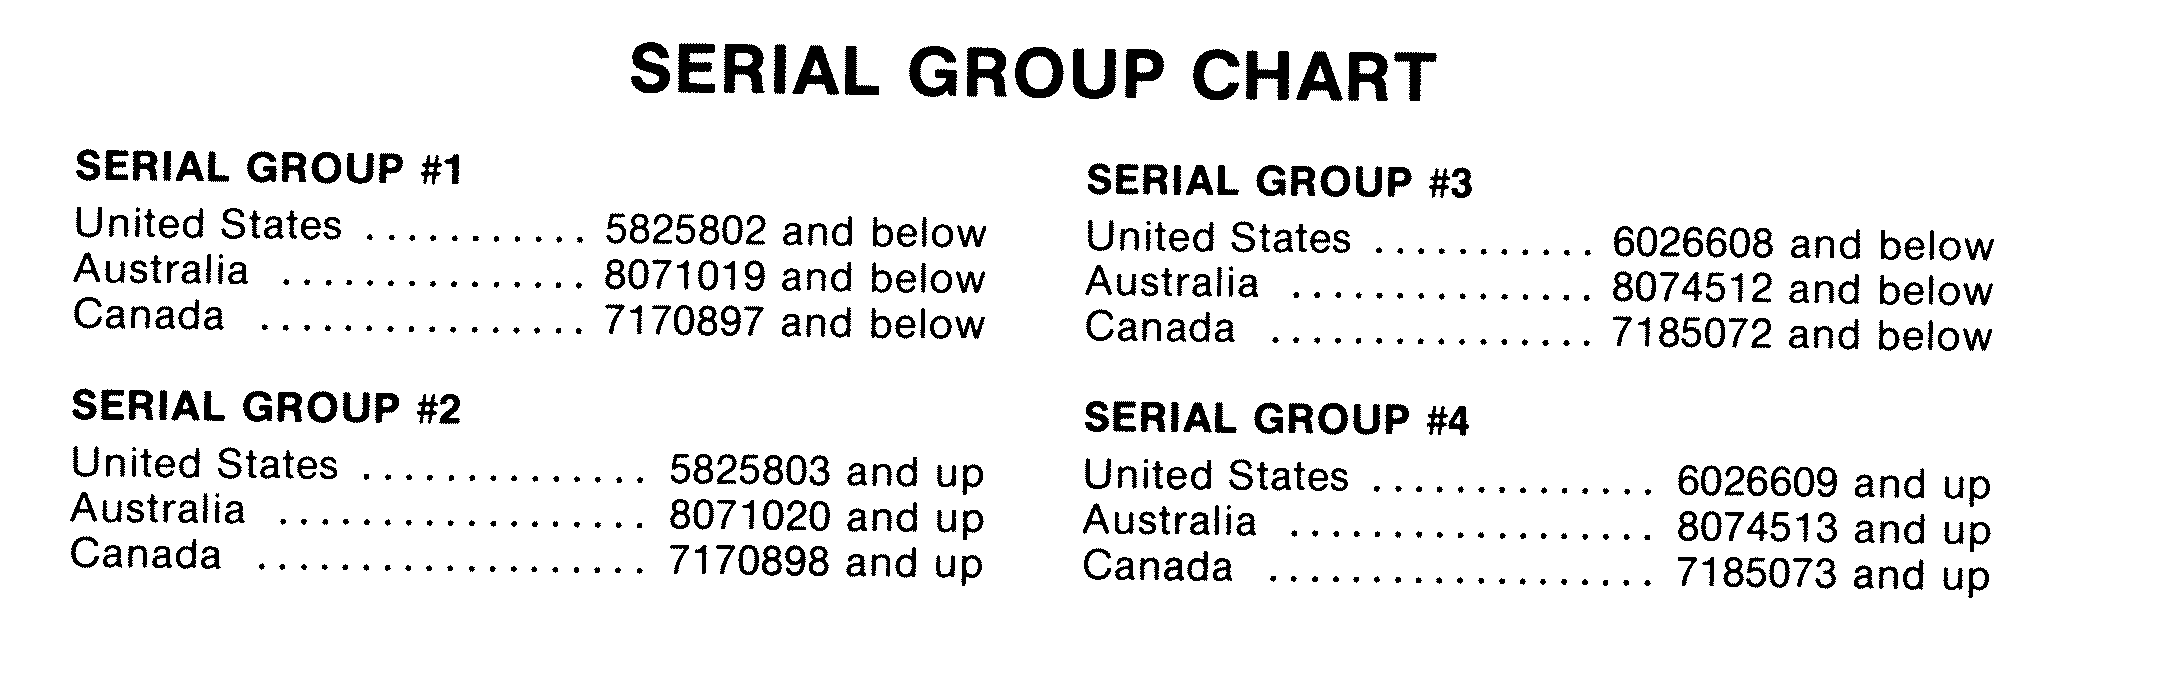 SERIAL GROUP CHART